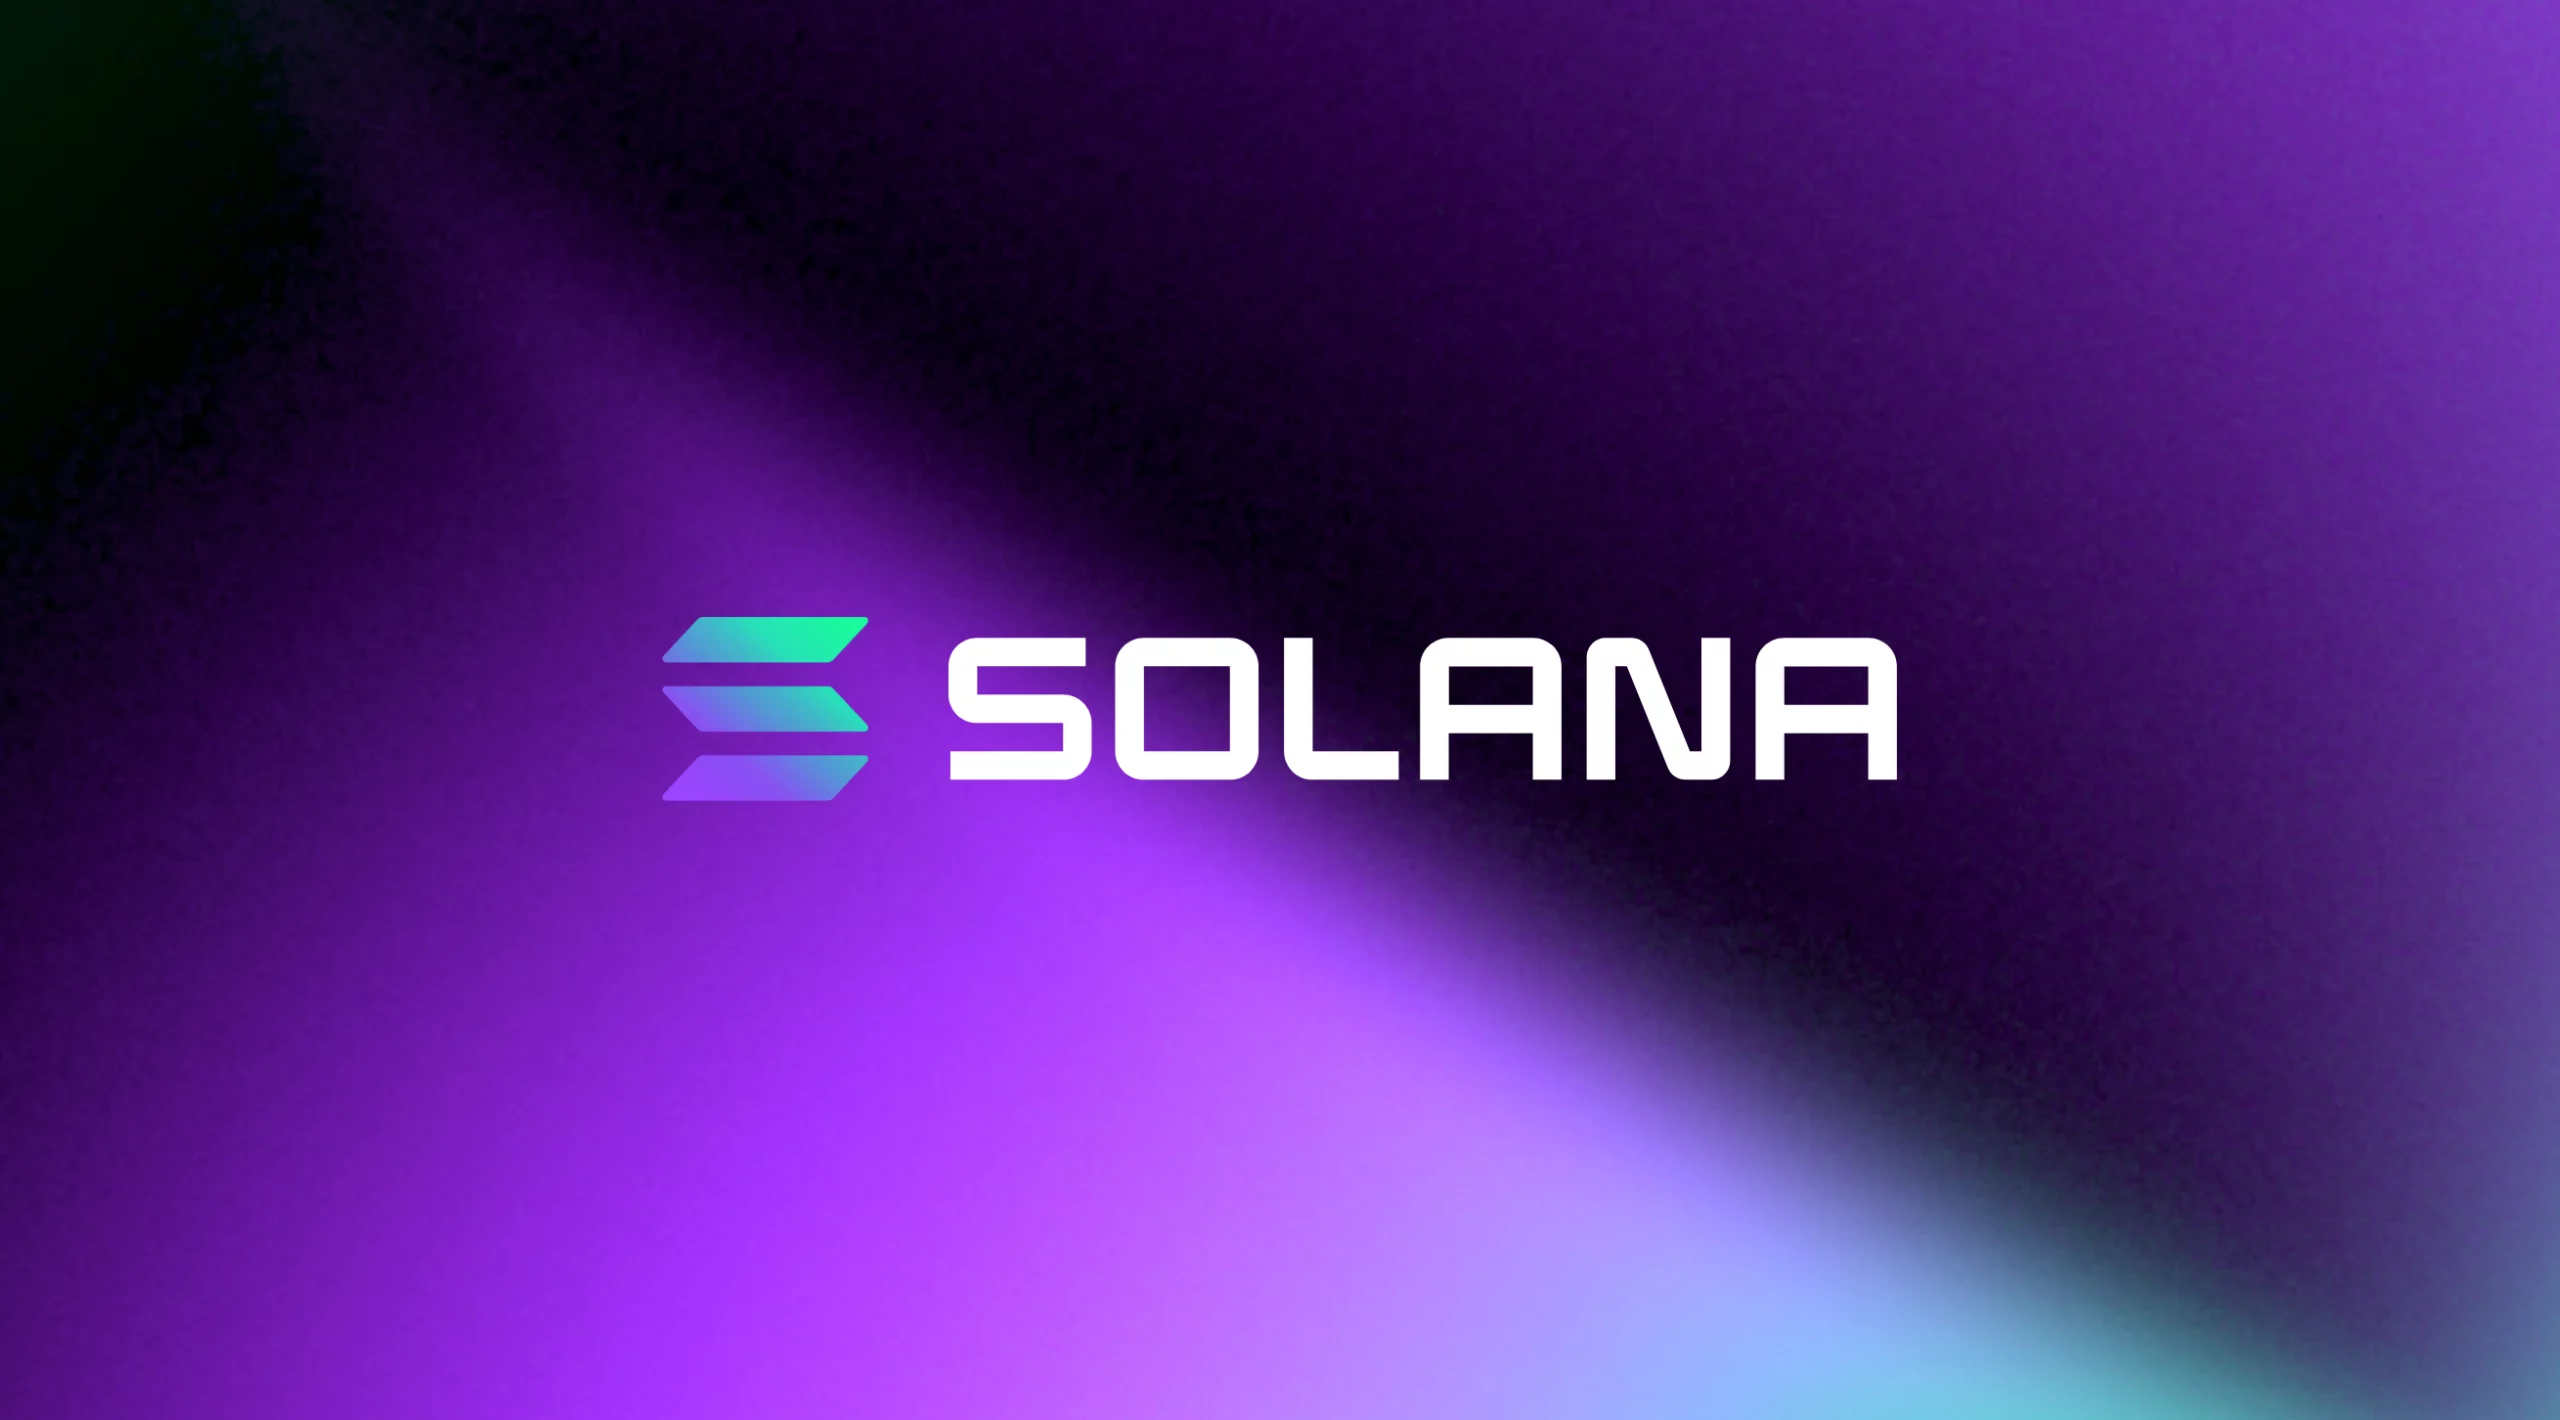 avalanche avax vs solana sol which is the better investment 65b96f5c12aad